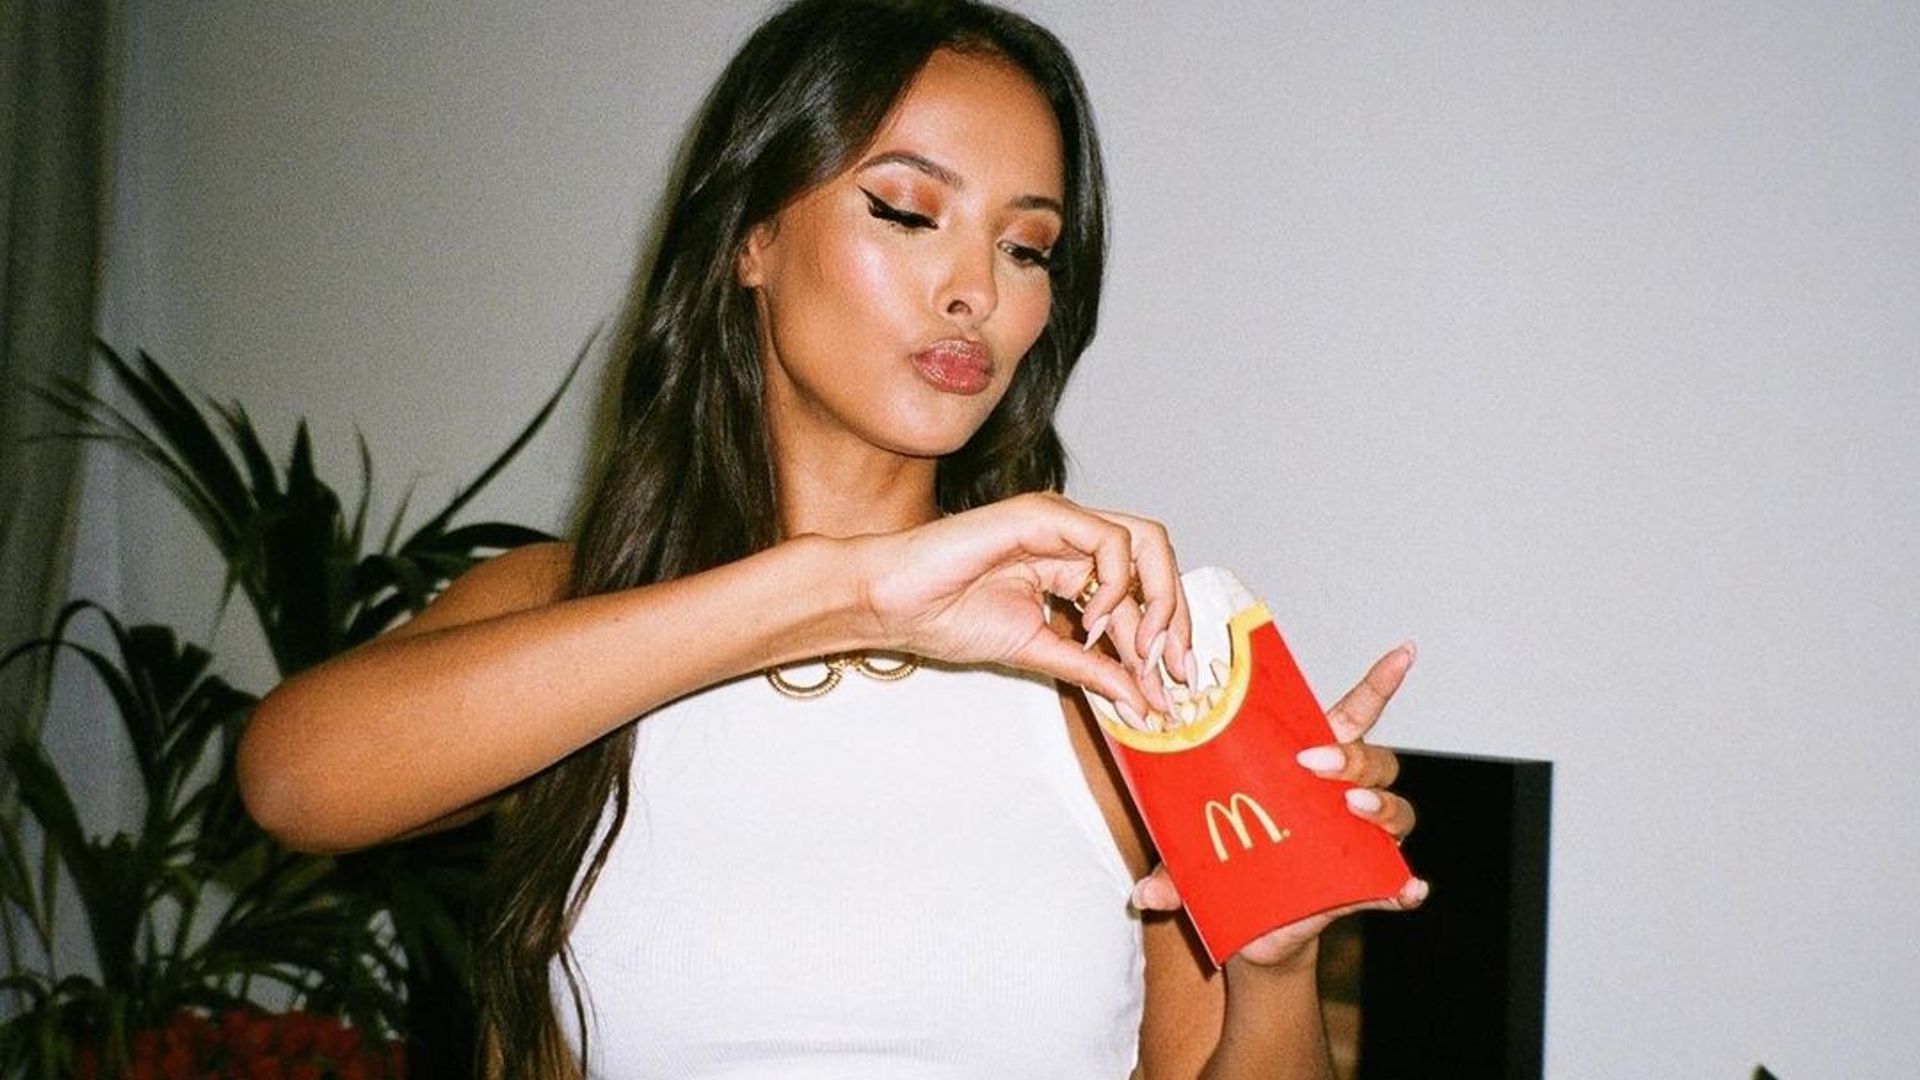 maya jama eating french fries in a white top